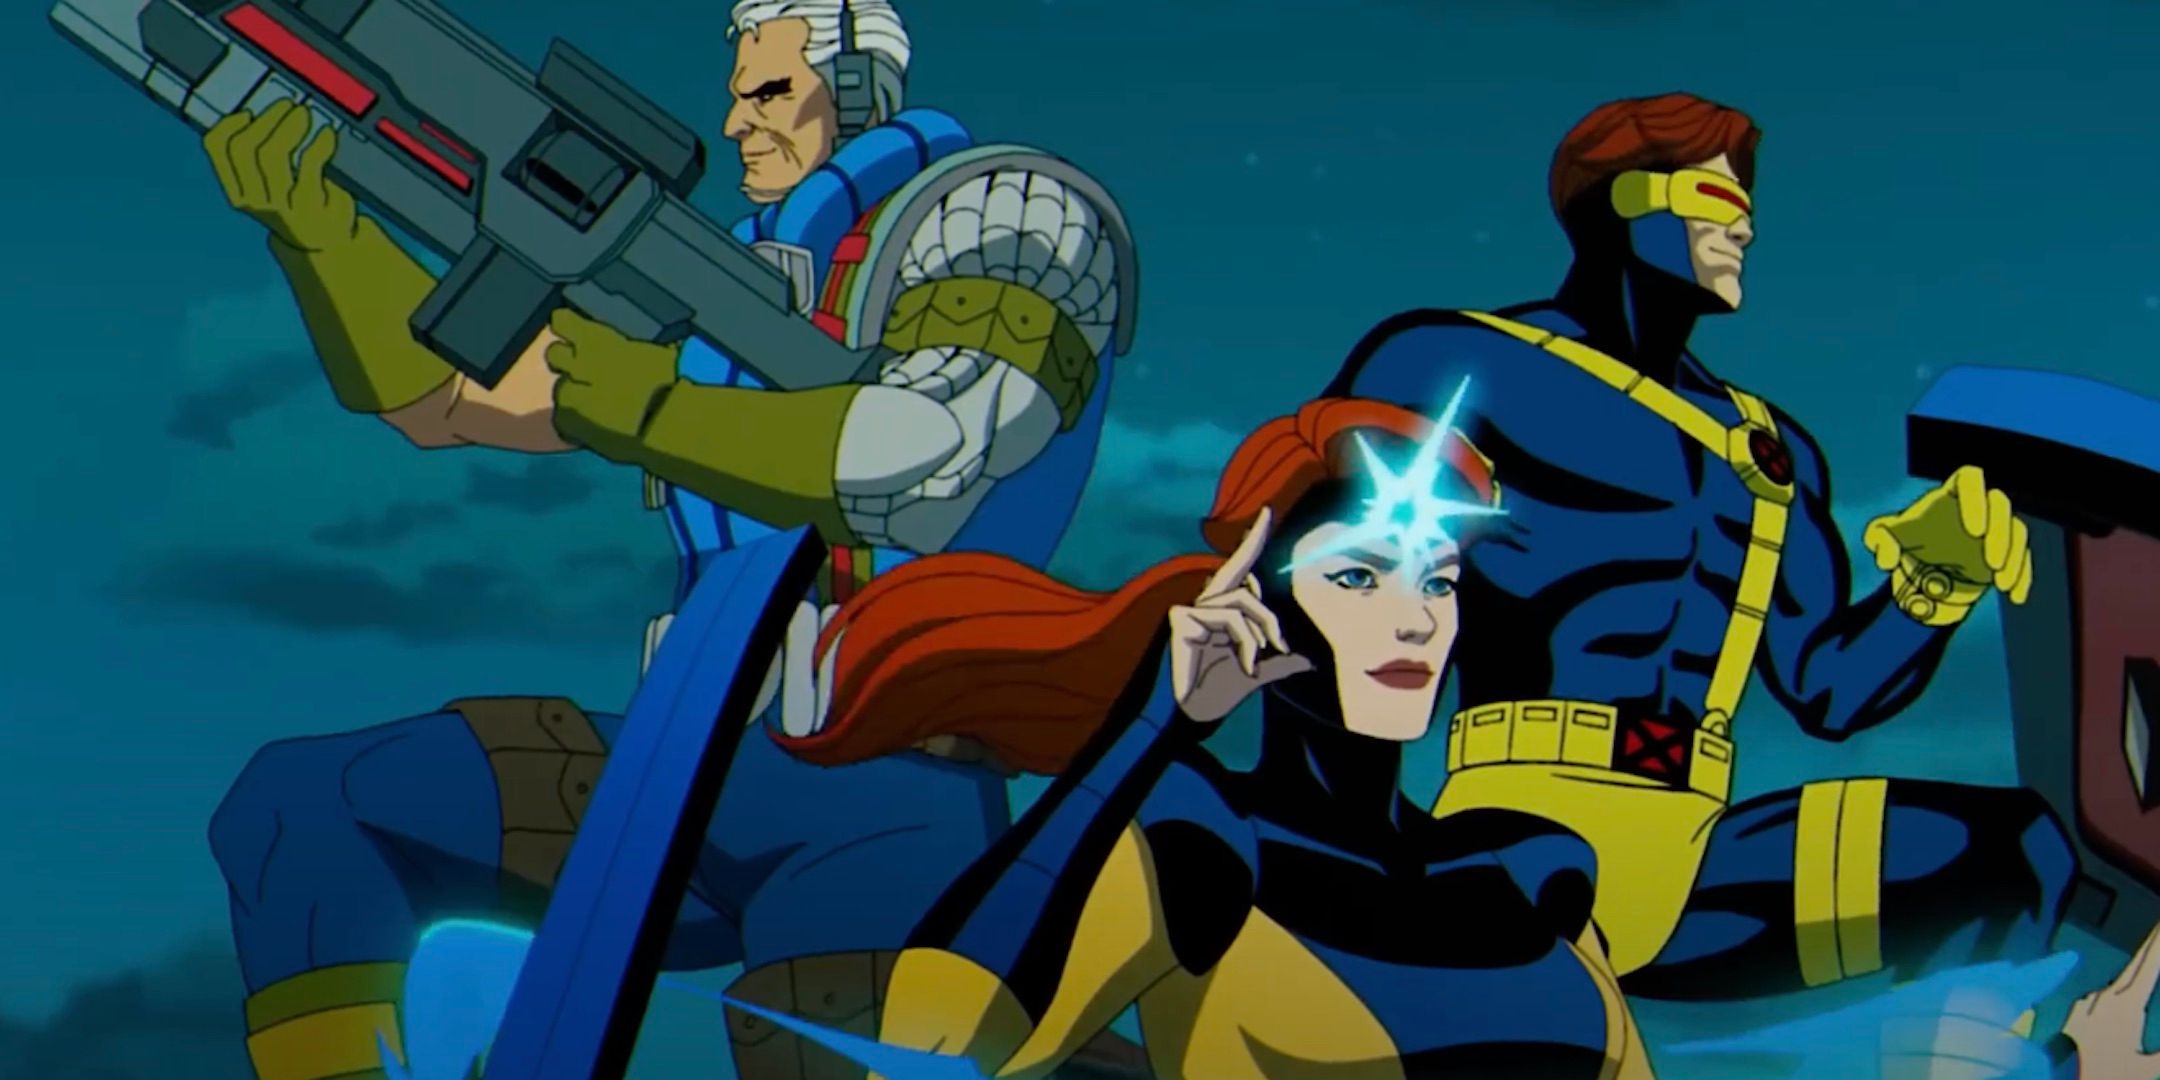 Jean Grey flies a car with Cyclops and Cable in X-Men '97